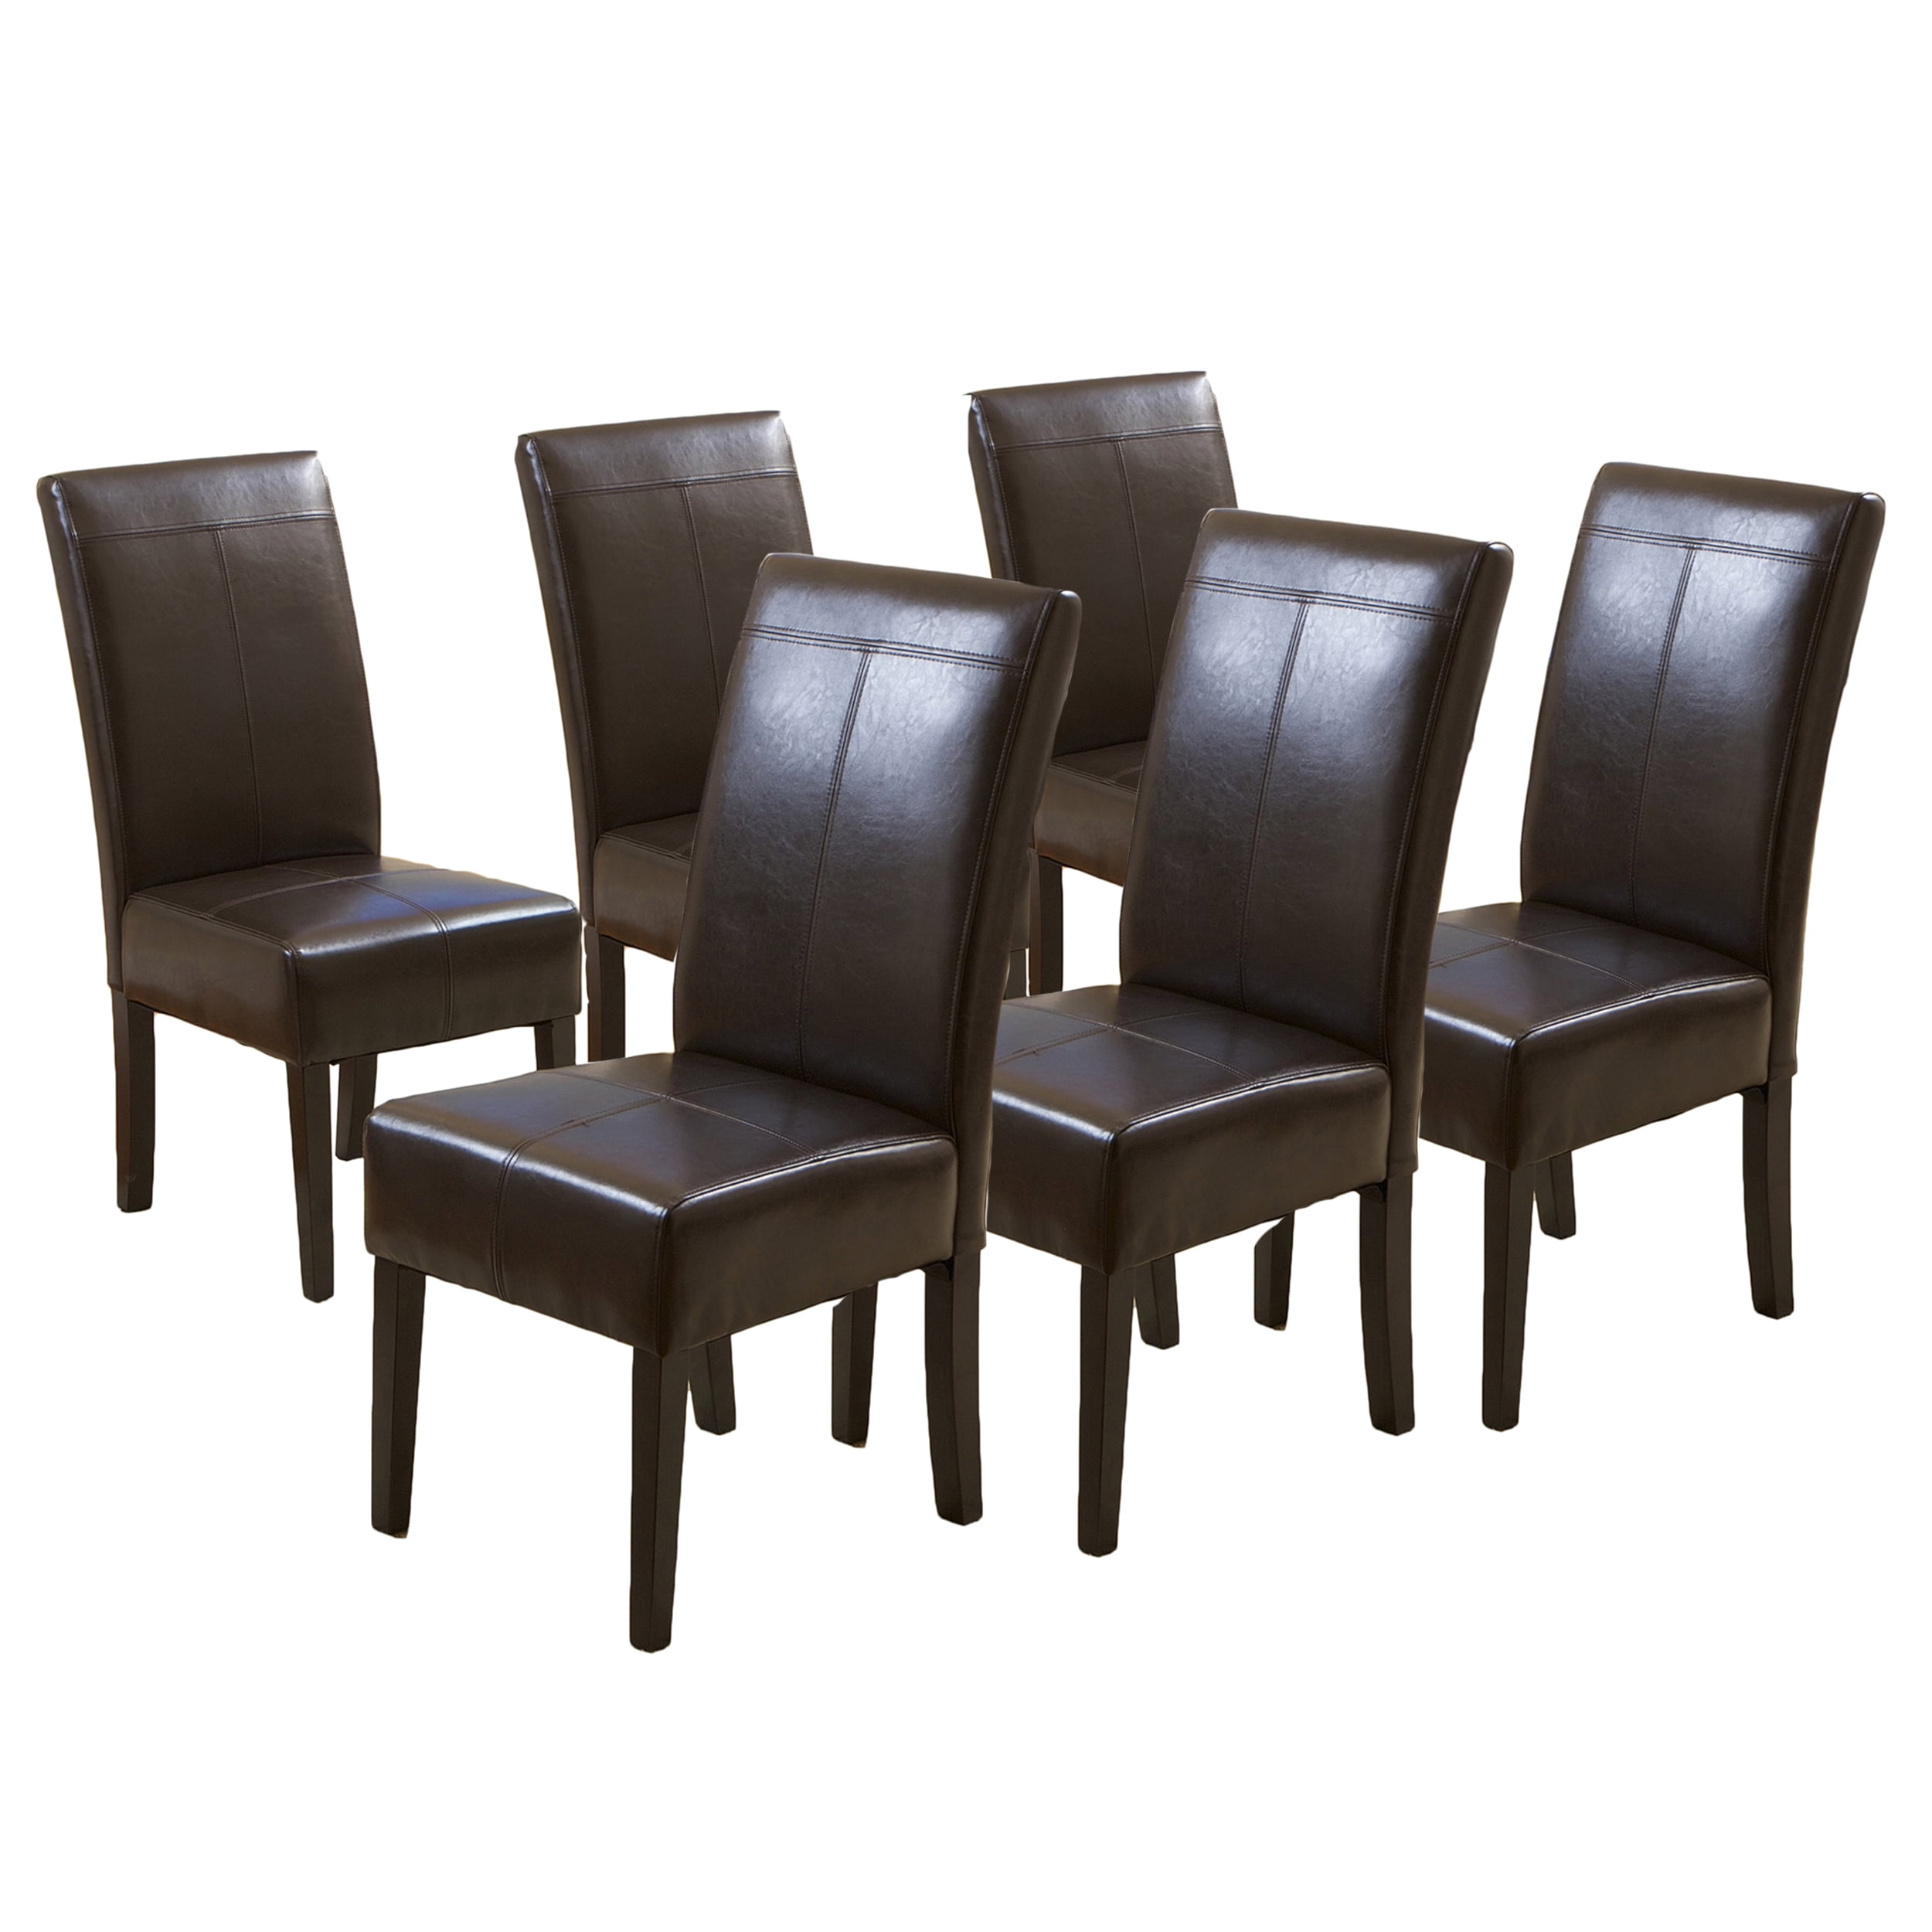 Emerson T Stitch Leather Dining Chairs, Brown Leather Dining Room Chairs With Arms